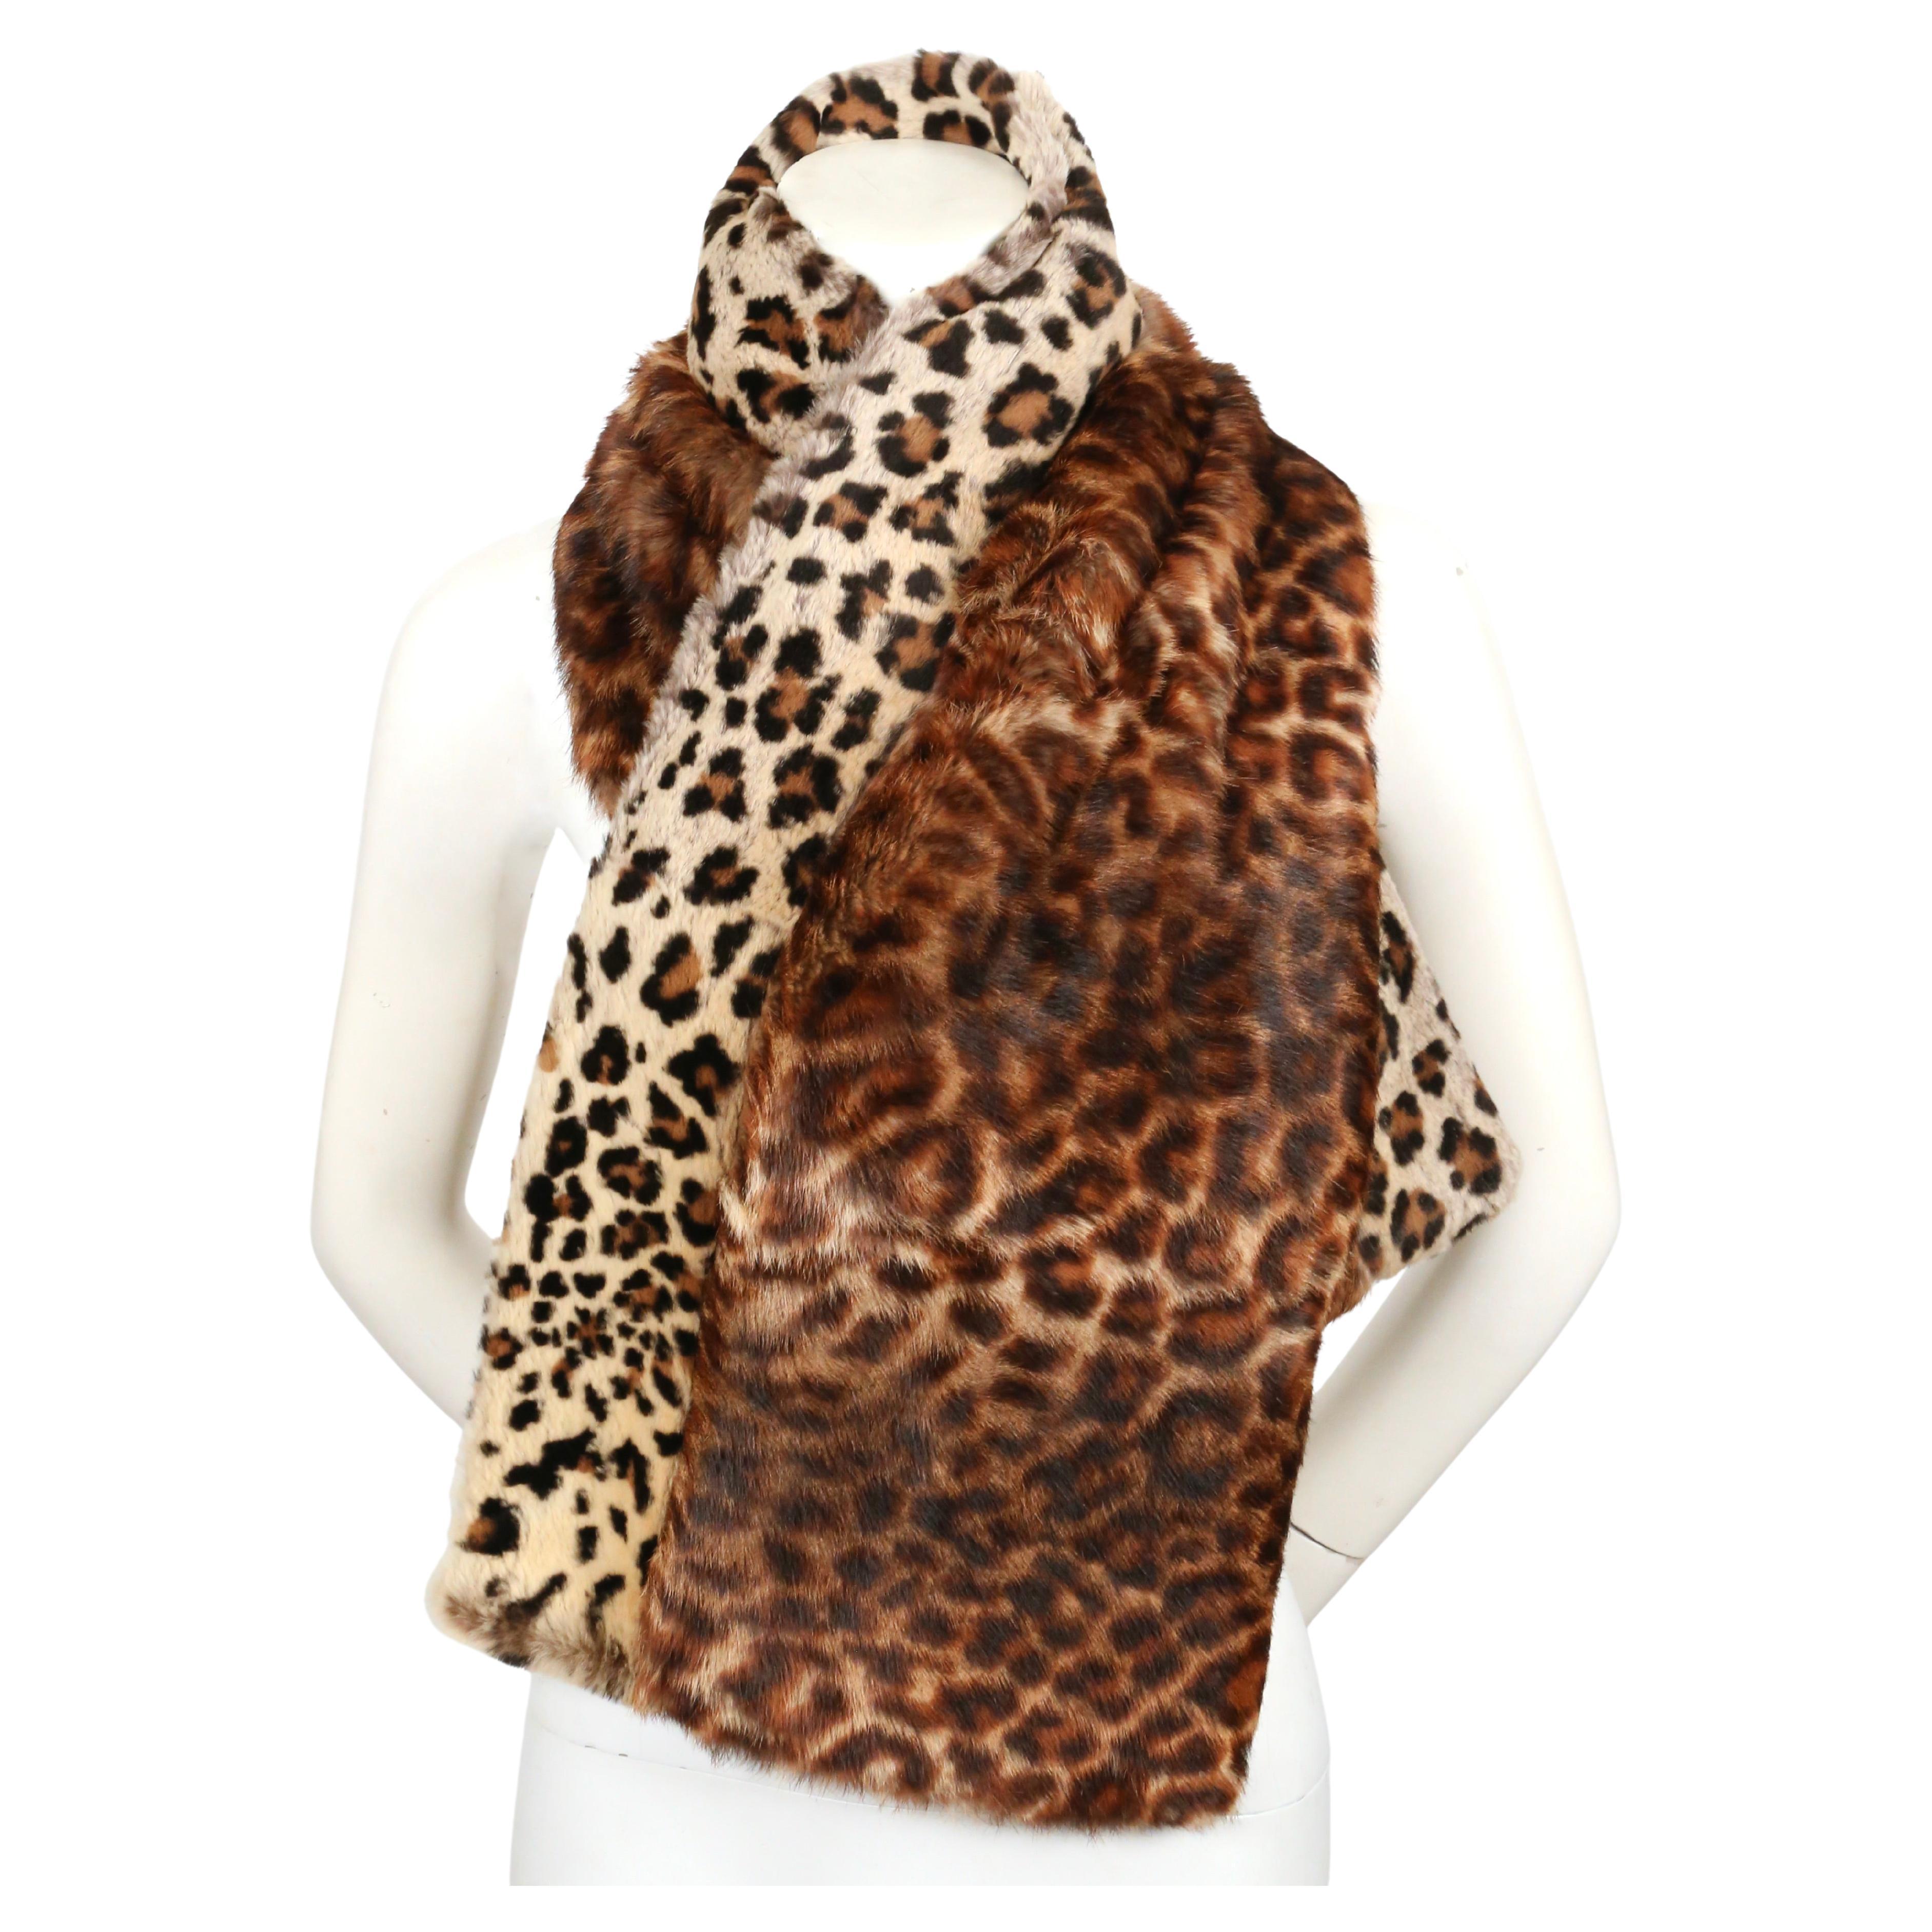 Leopard printed fur scarf designed by Dries Van Noten exactly as seen in the fall 2010 runway. Scarf measures approximately 12' by 49